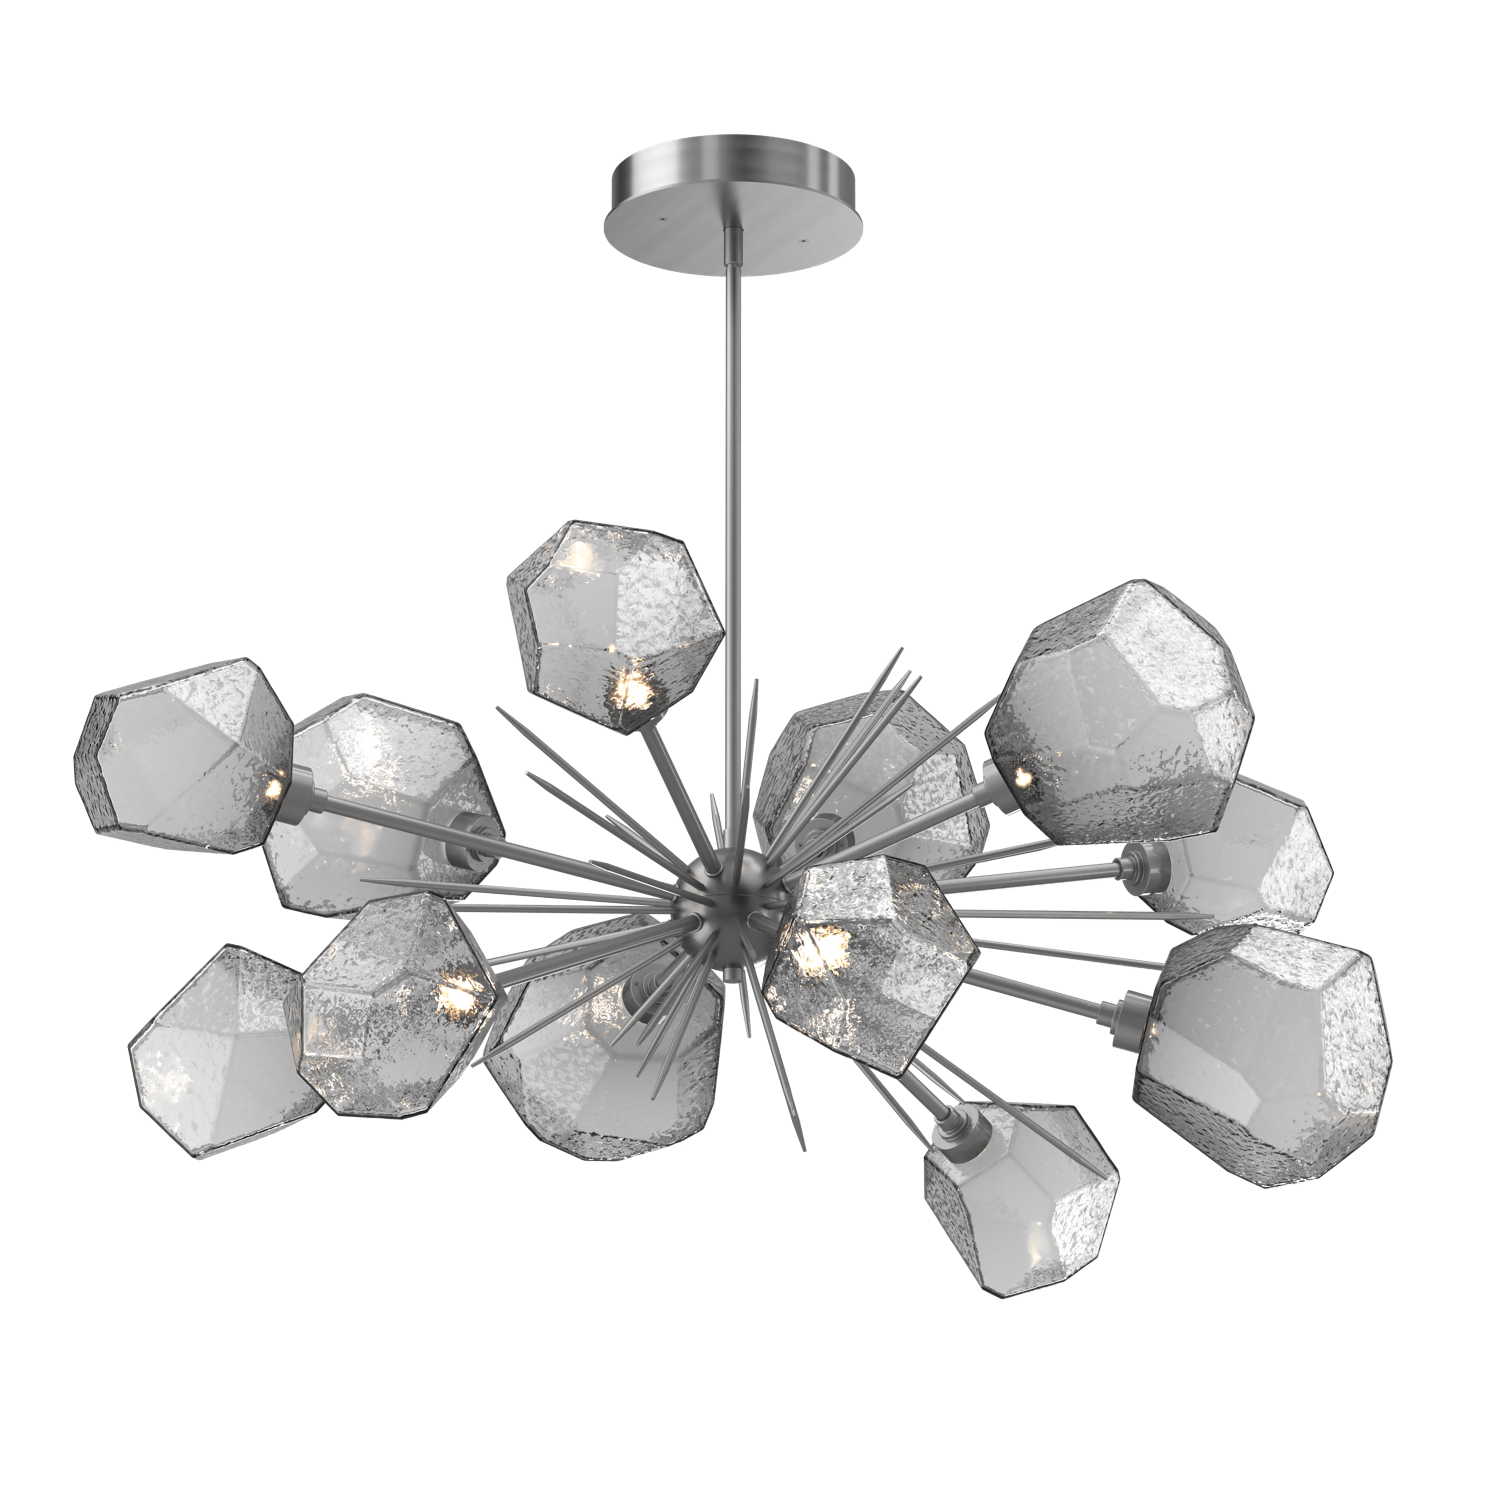 PLB0039-0D-SN-S-Hammerton-Studio-Gem-43-inch-oval-starburst-chandelier-with-satin-nickel-finish-and-smoke-blown-glass-shades-and-LED-lamping